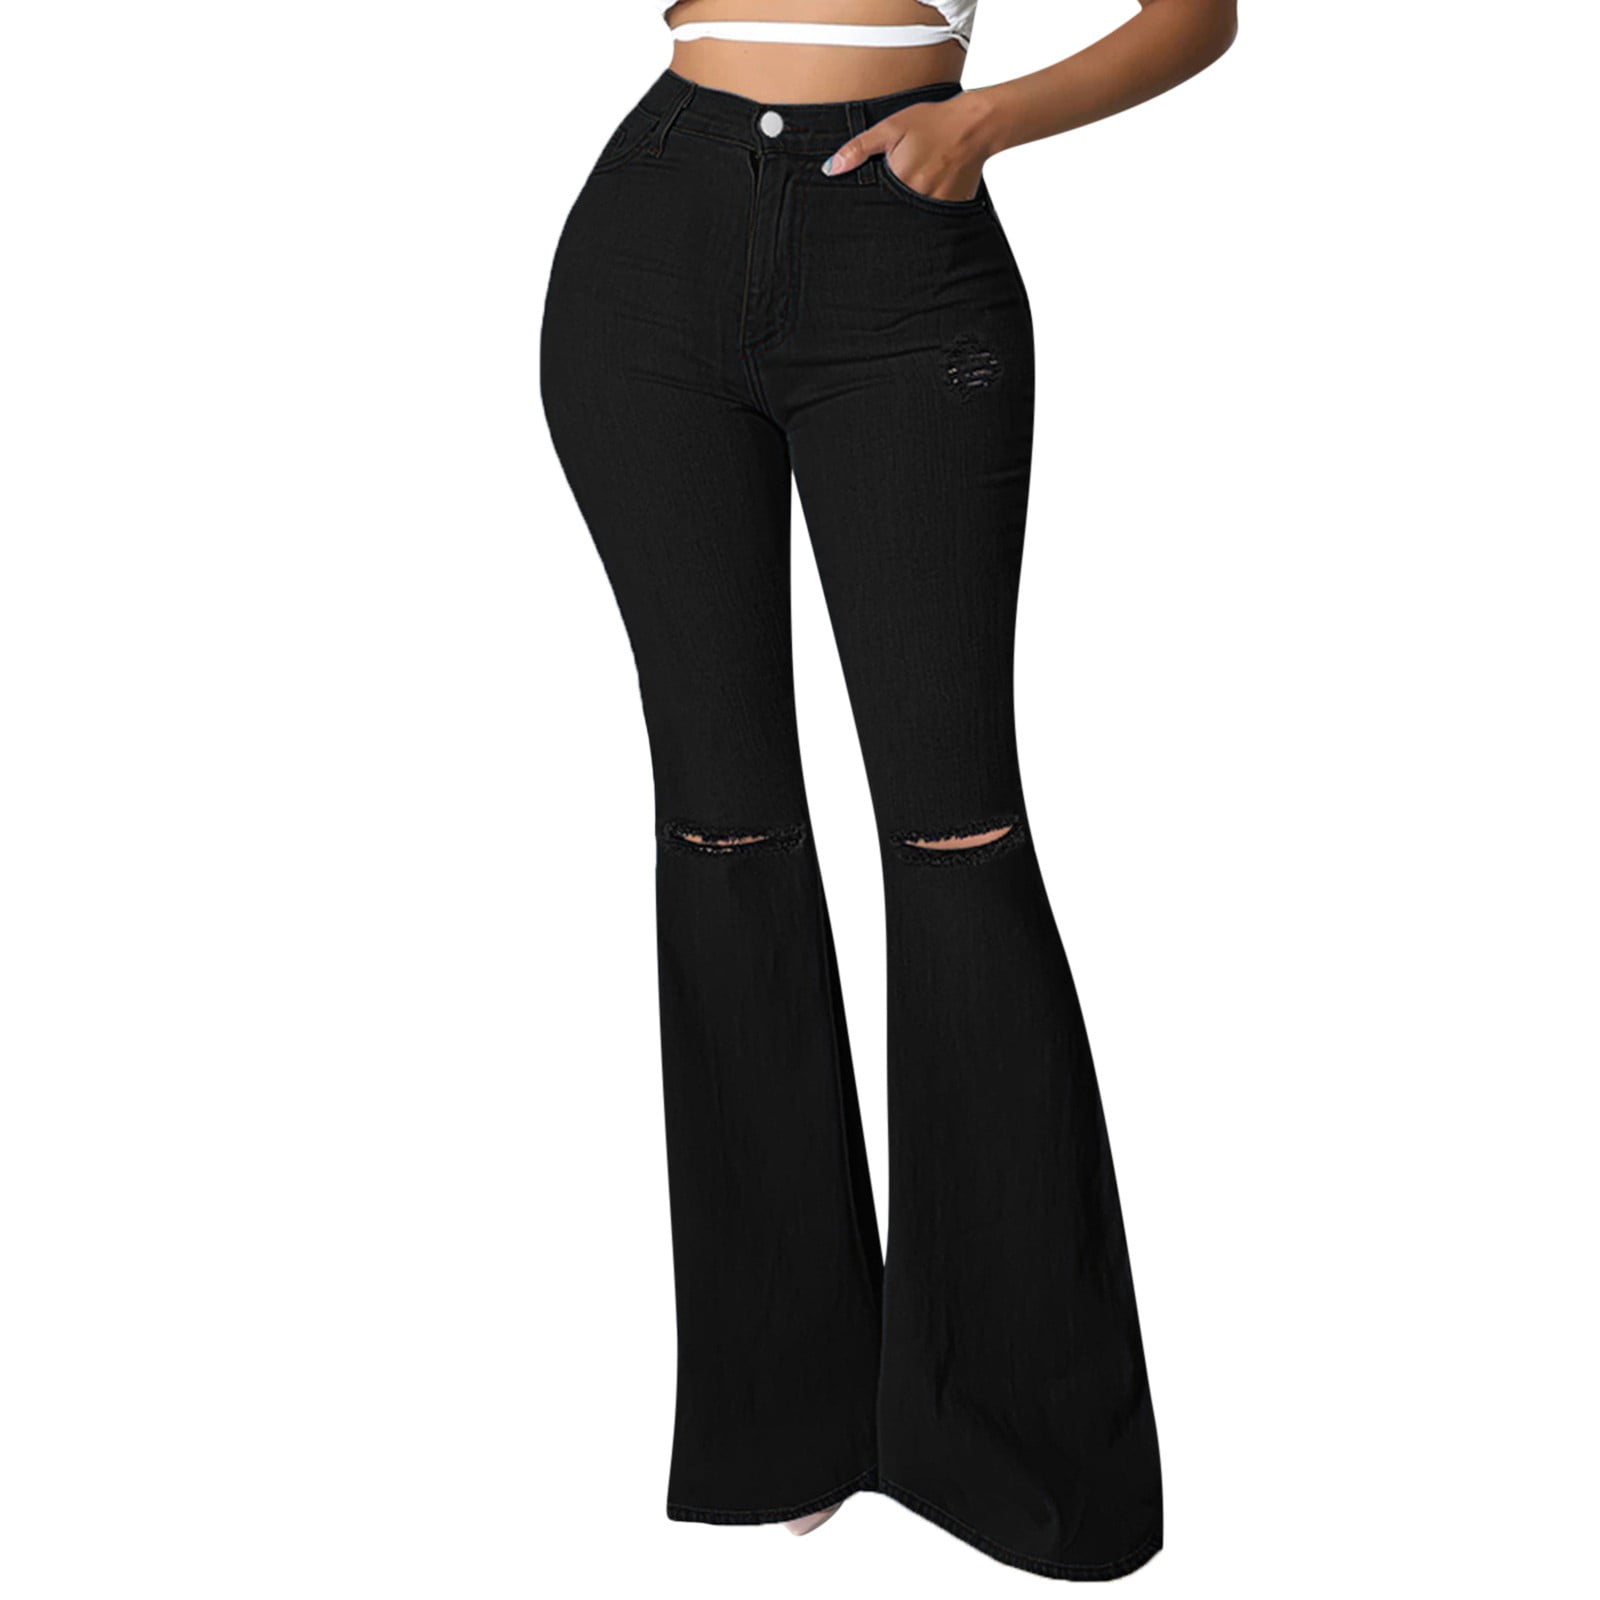 CBGELRT Elegant Jeans for Women High Waist Female Flare Jeans Women Jeans  Pant Bell Bottoms Pant Casual Hole Button Jeans Zipper Trousers